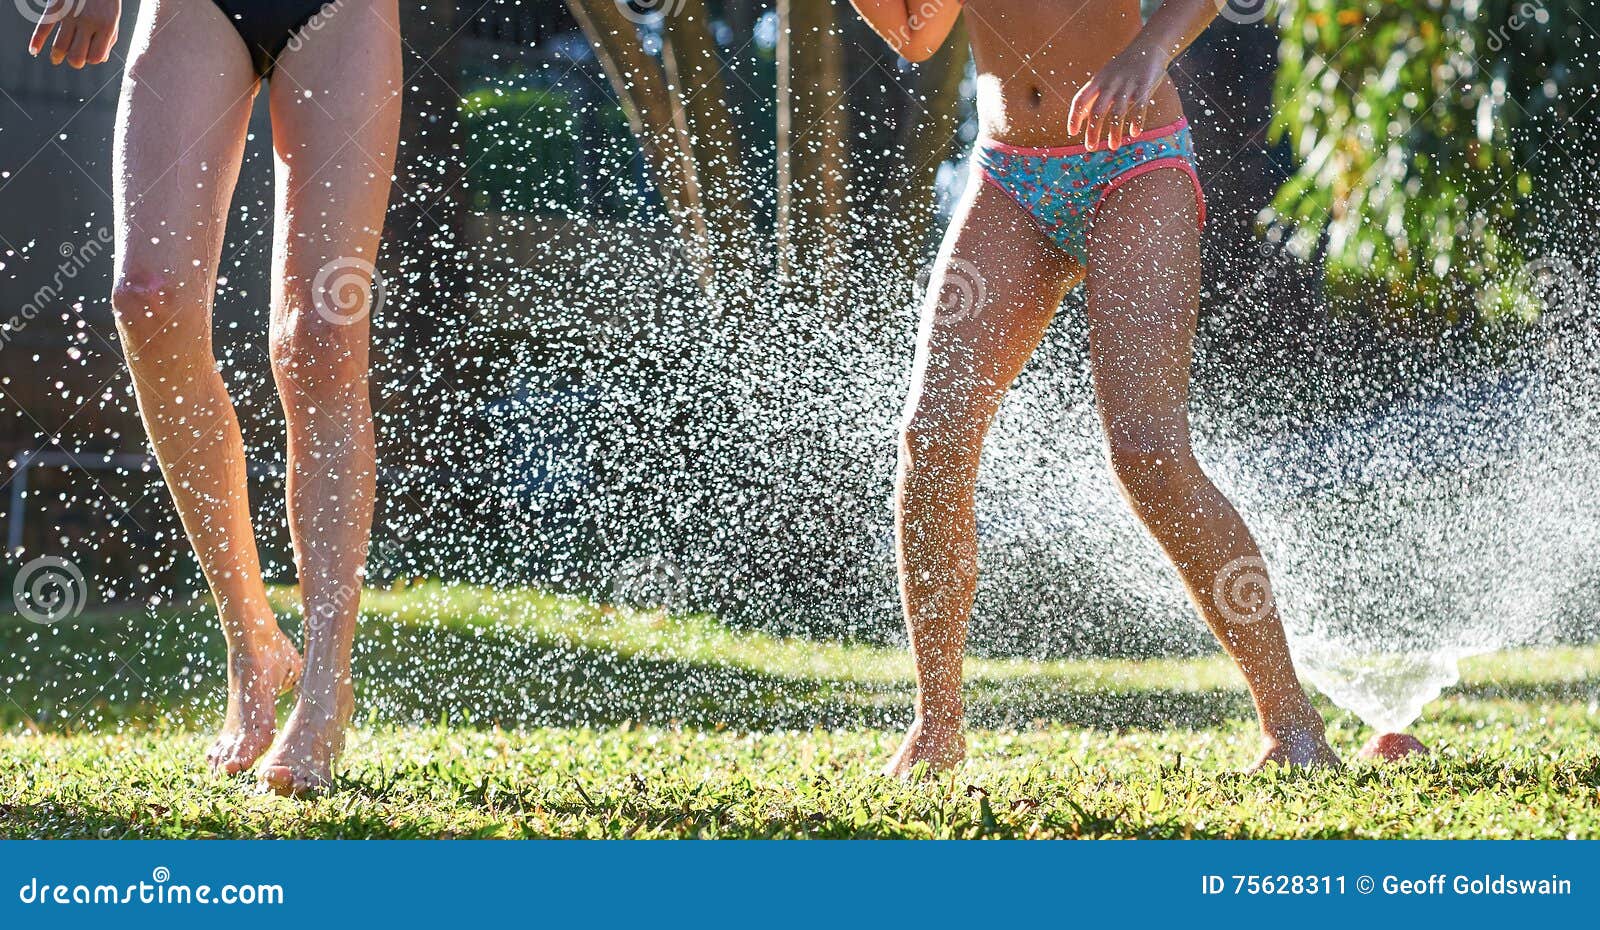 Young Girls Playing Jumping In A Garden Water Lawn 